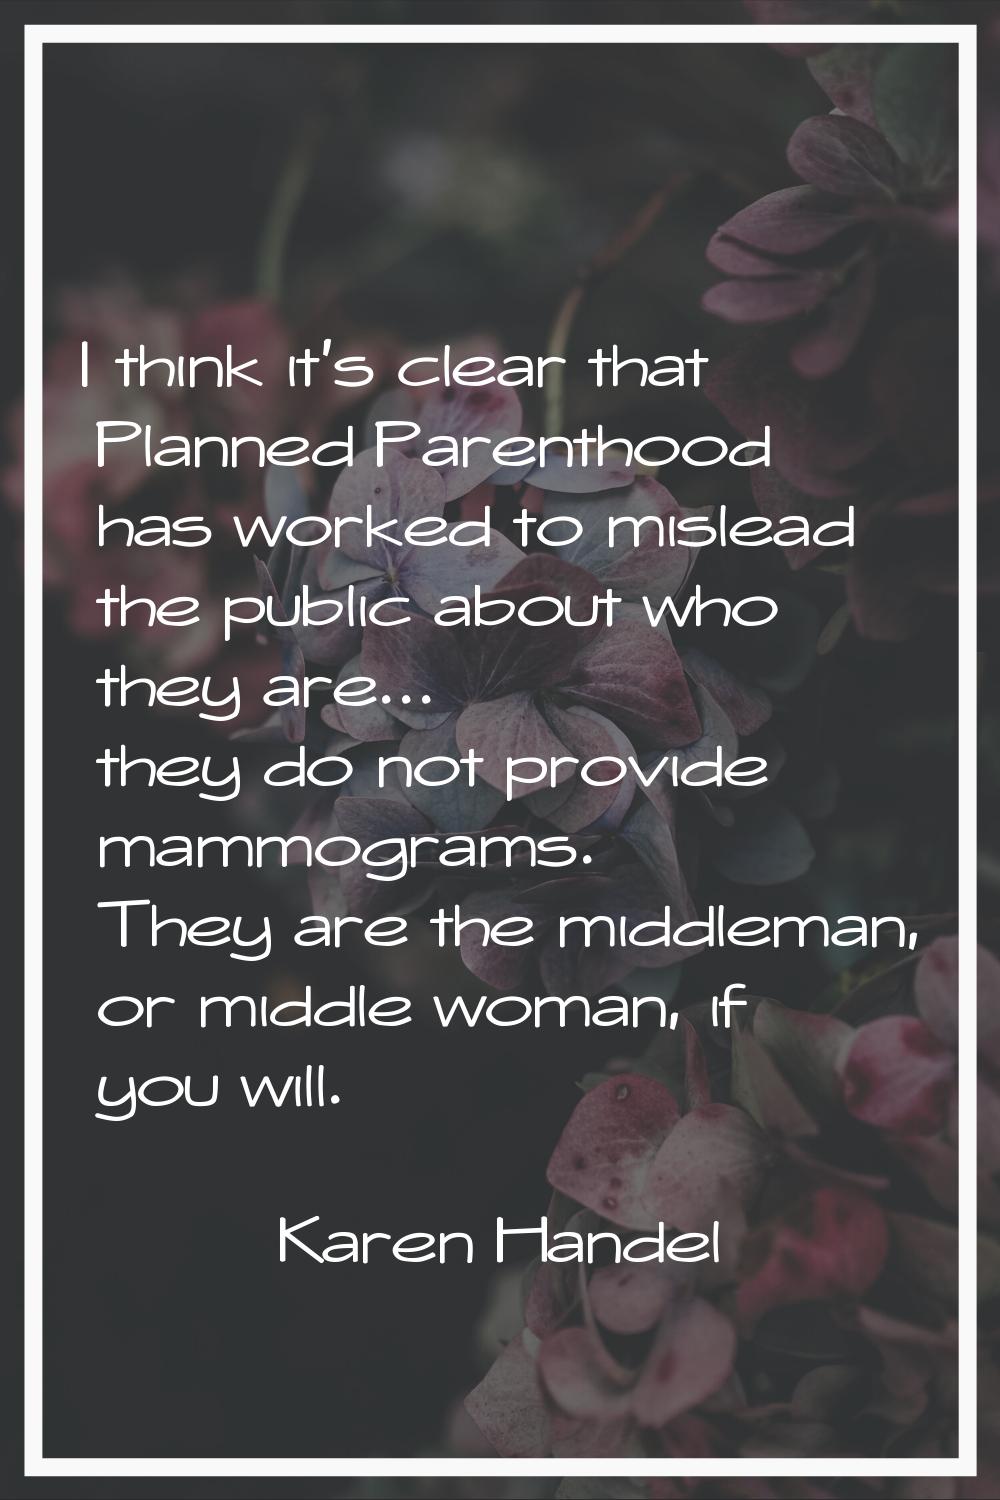 I think it's clear that Planned Parenthood has worked to mislead the public about who they are... t